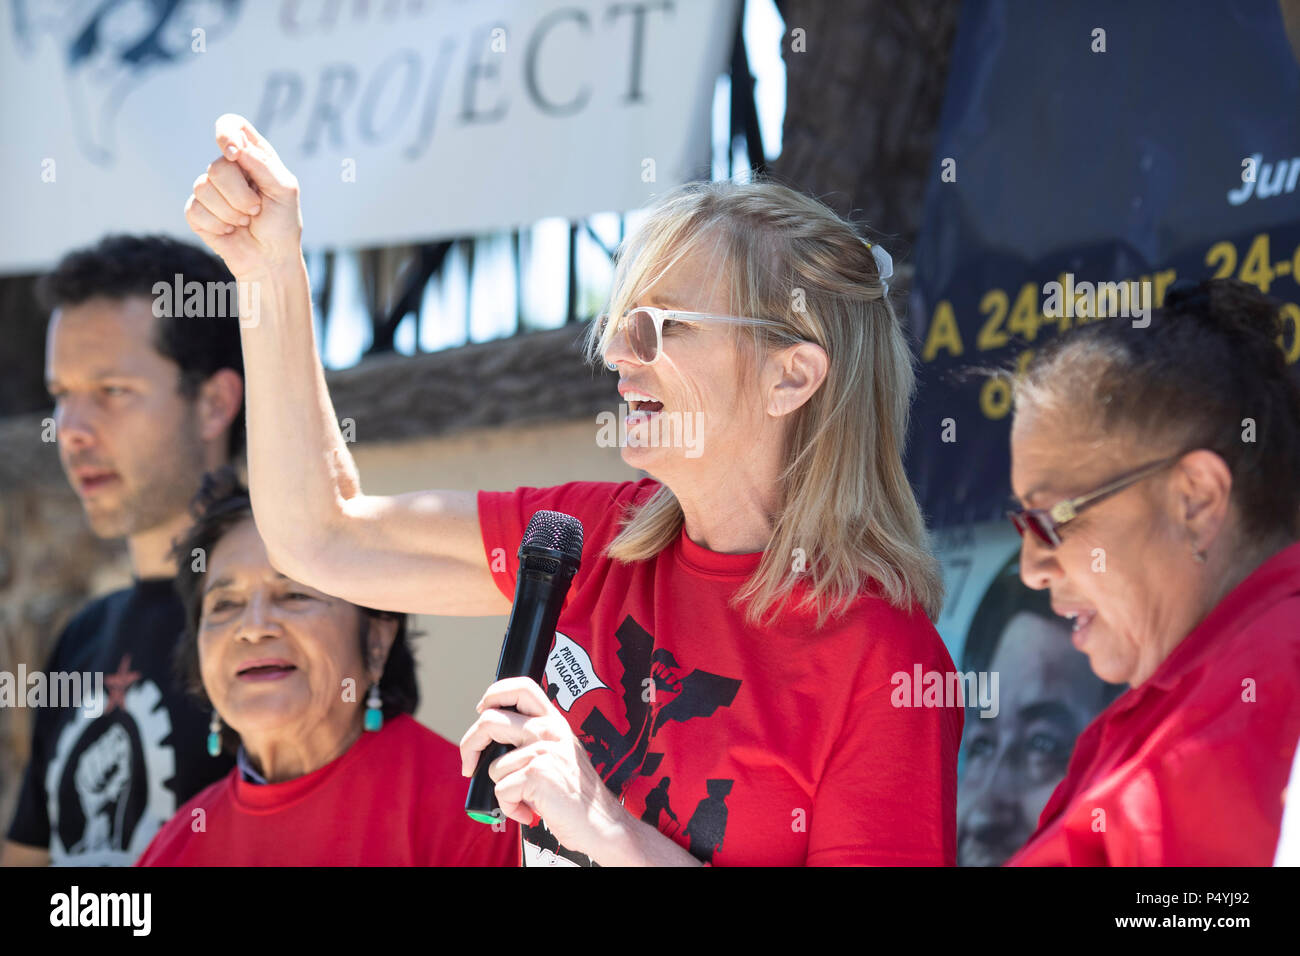 Kerry Kennedy, director of the Robert F. Kennedy Center for Justice and daughter of Robert and Ethel Kennedy, kicks off a 24-day hunger strike protesting Pres. Donald Trump's immigration policies during a rally on the U.S.-Mexican border in McAllen, Texas. Stock Photo